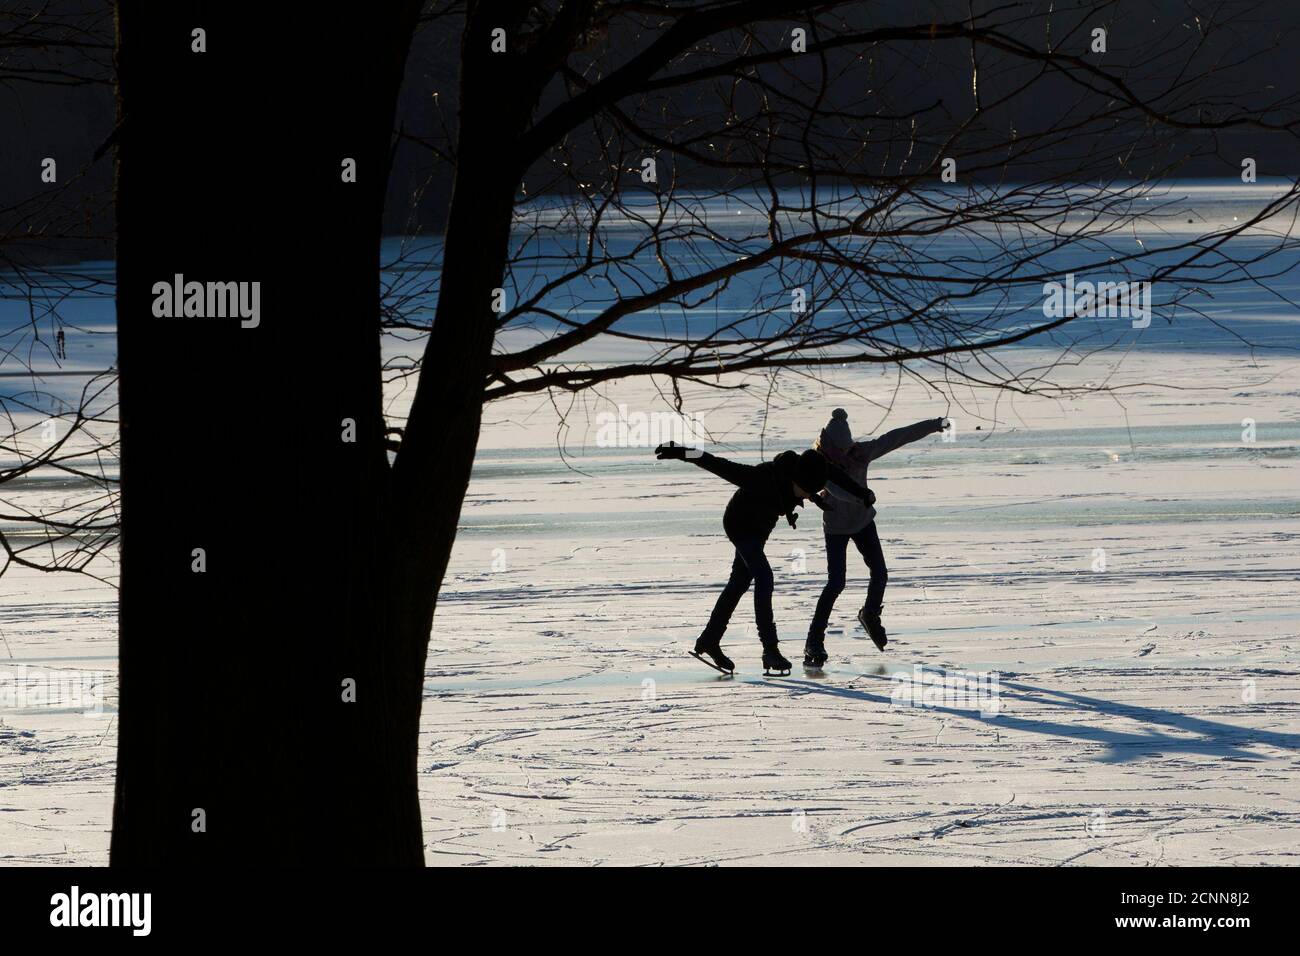 A woman and a girl skate on a frozen lake on a cold sunny day in Berlin's Charlottenburg district, February 1, 2012. The cold snap which has gripped Europe and killed 60 people in the east is set to lift European power and gas prices further as energy demand for heating surges while temperatures are expected to stay below freezing point. German met office DWD expected the icy high pressure front from northern Russia to last well into next week. REUTERS/Thomas Peter (GERMANY - Tags: ENVIRONMENT SOCIETY) Stock Photo